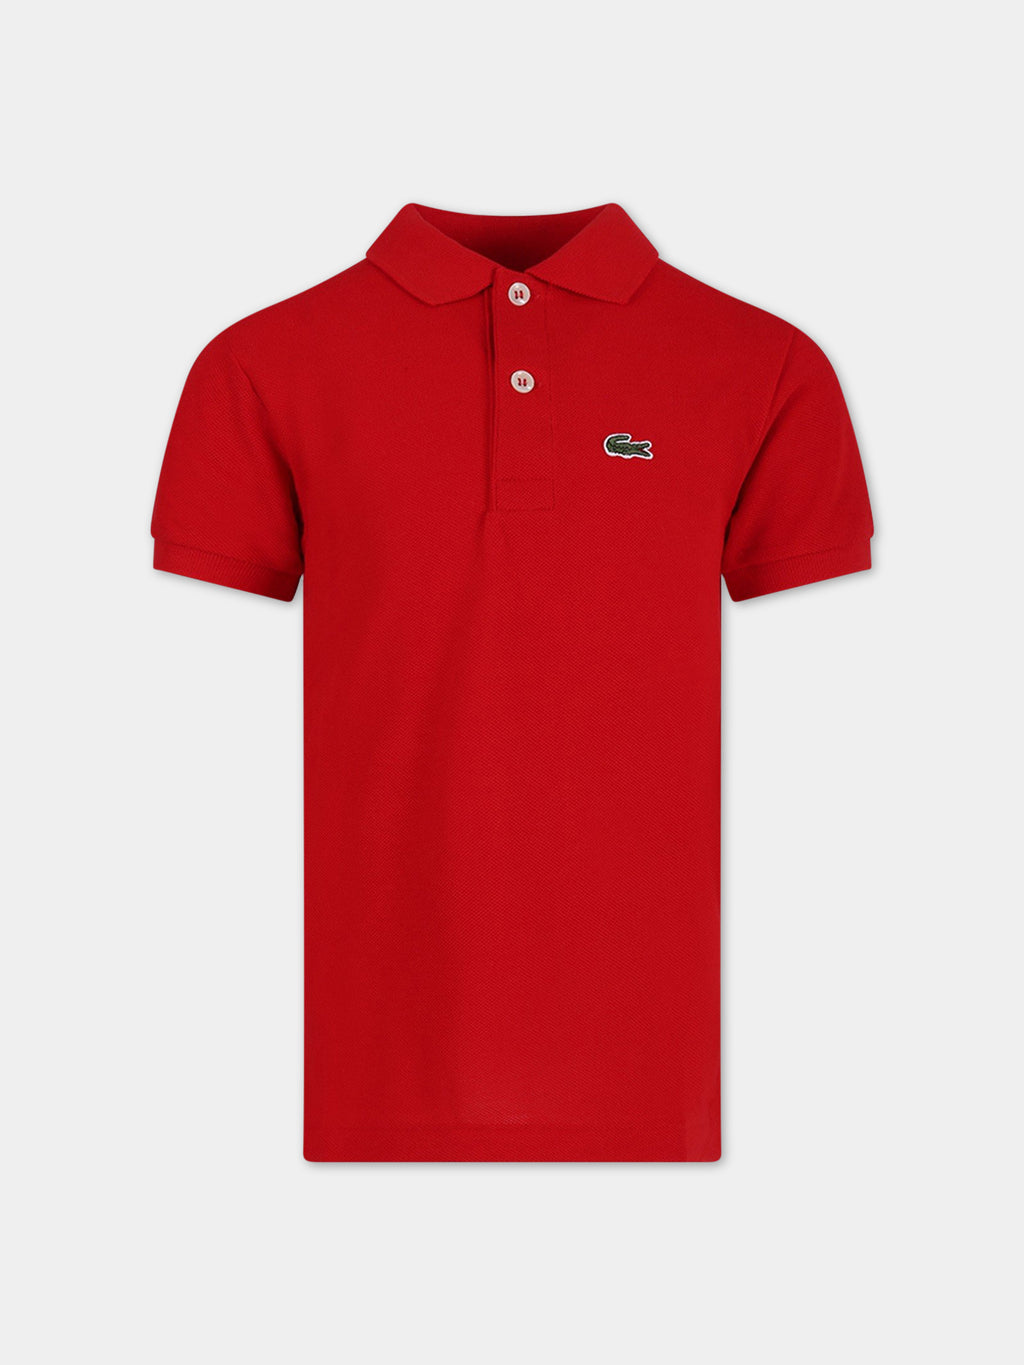 Red polo shirt for boy with green crocodile